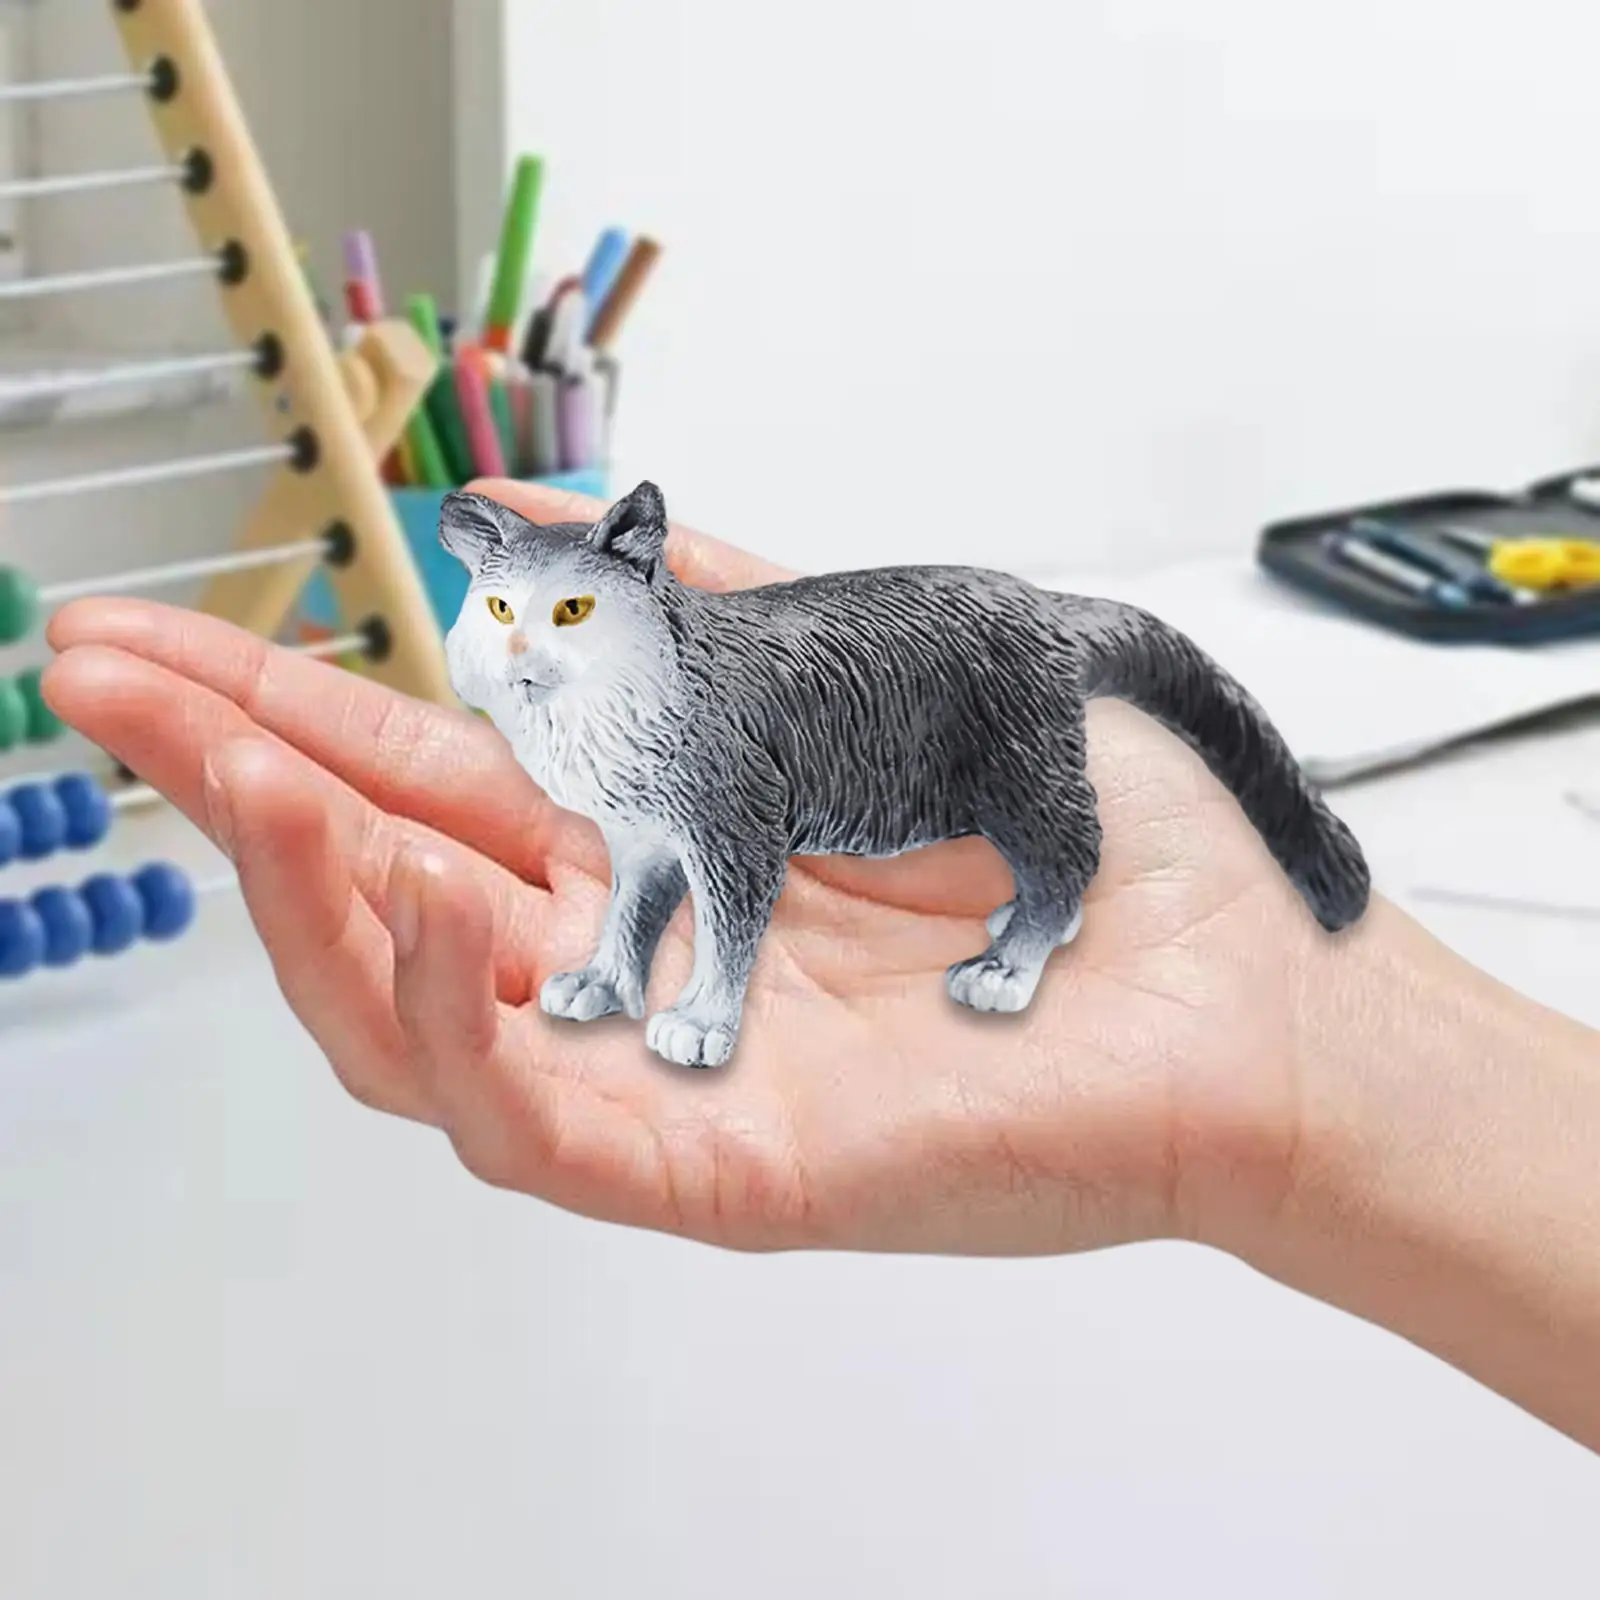 Simulation Realistic Animals Model Toys Collection Miniature Cats Figure for Birthday Gift Decor Cake Topper Party Favor